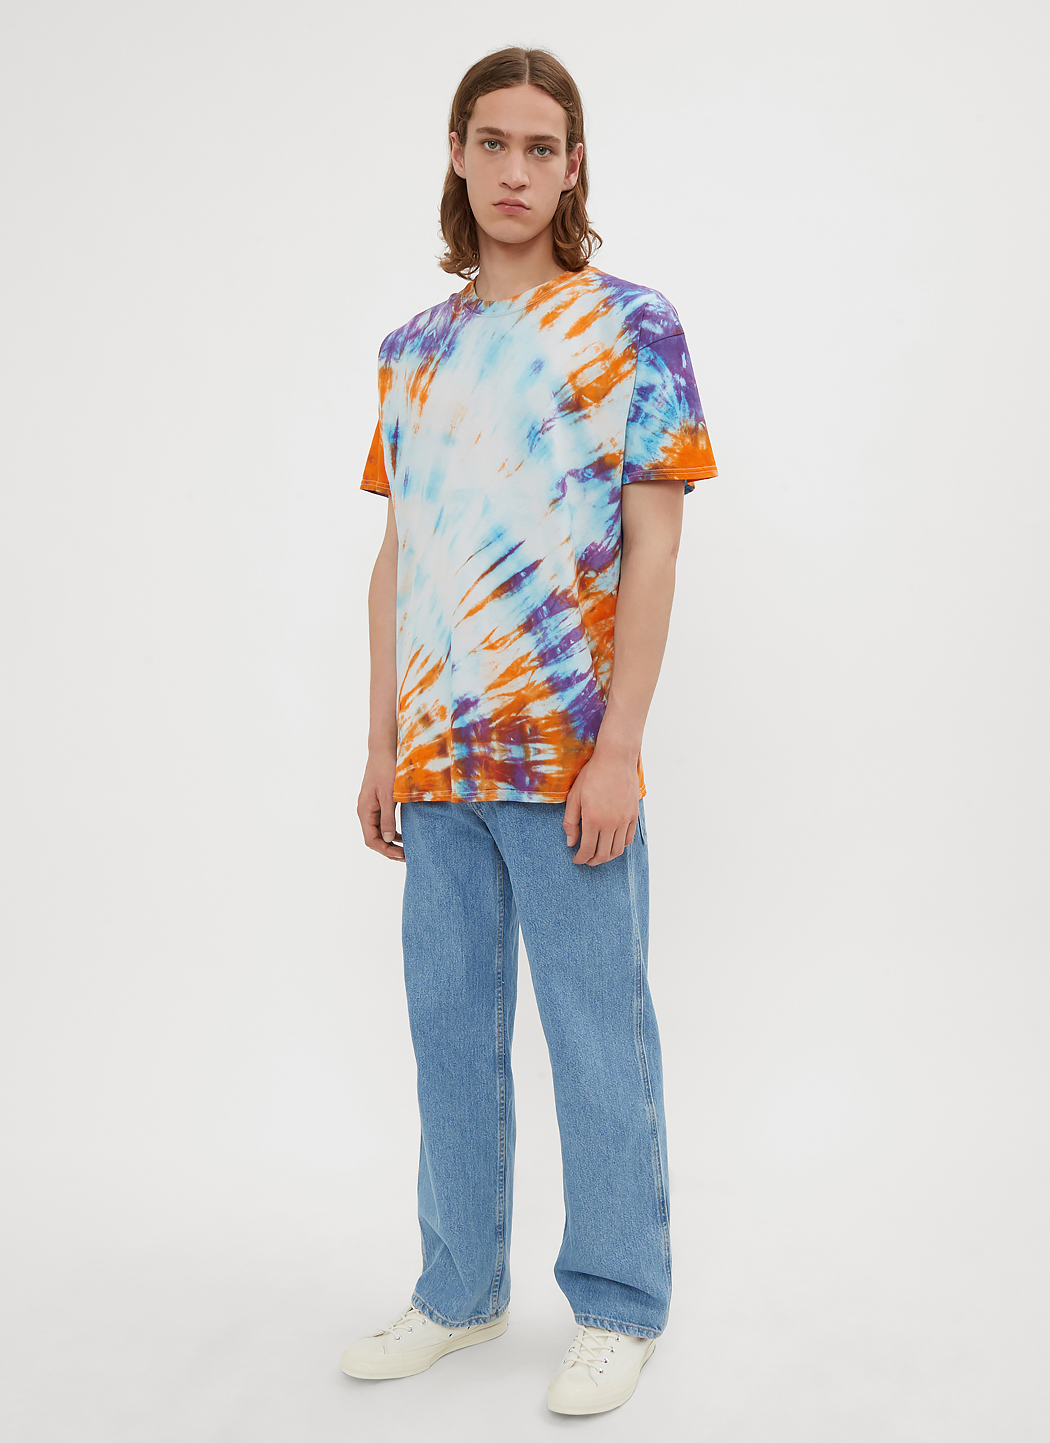 Stain Shade Mix 4 T-Shirt in Blue | LN-CC